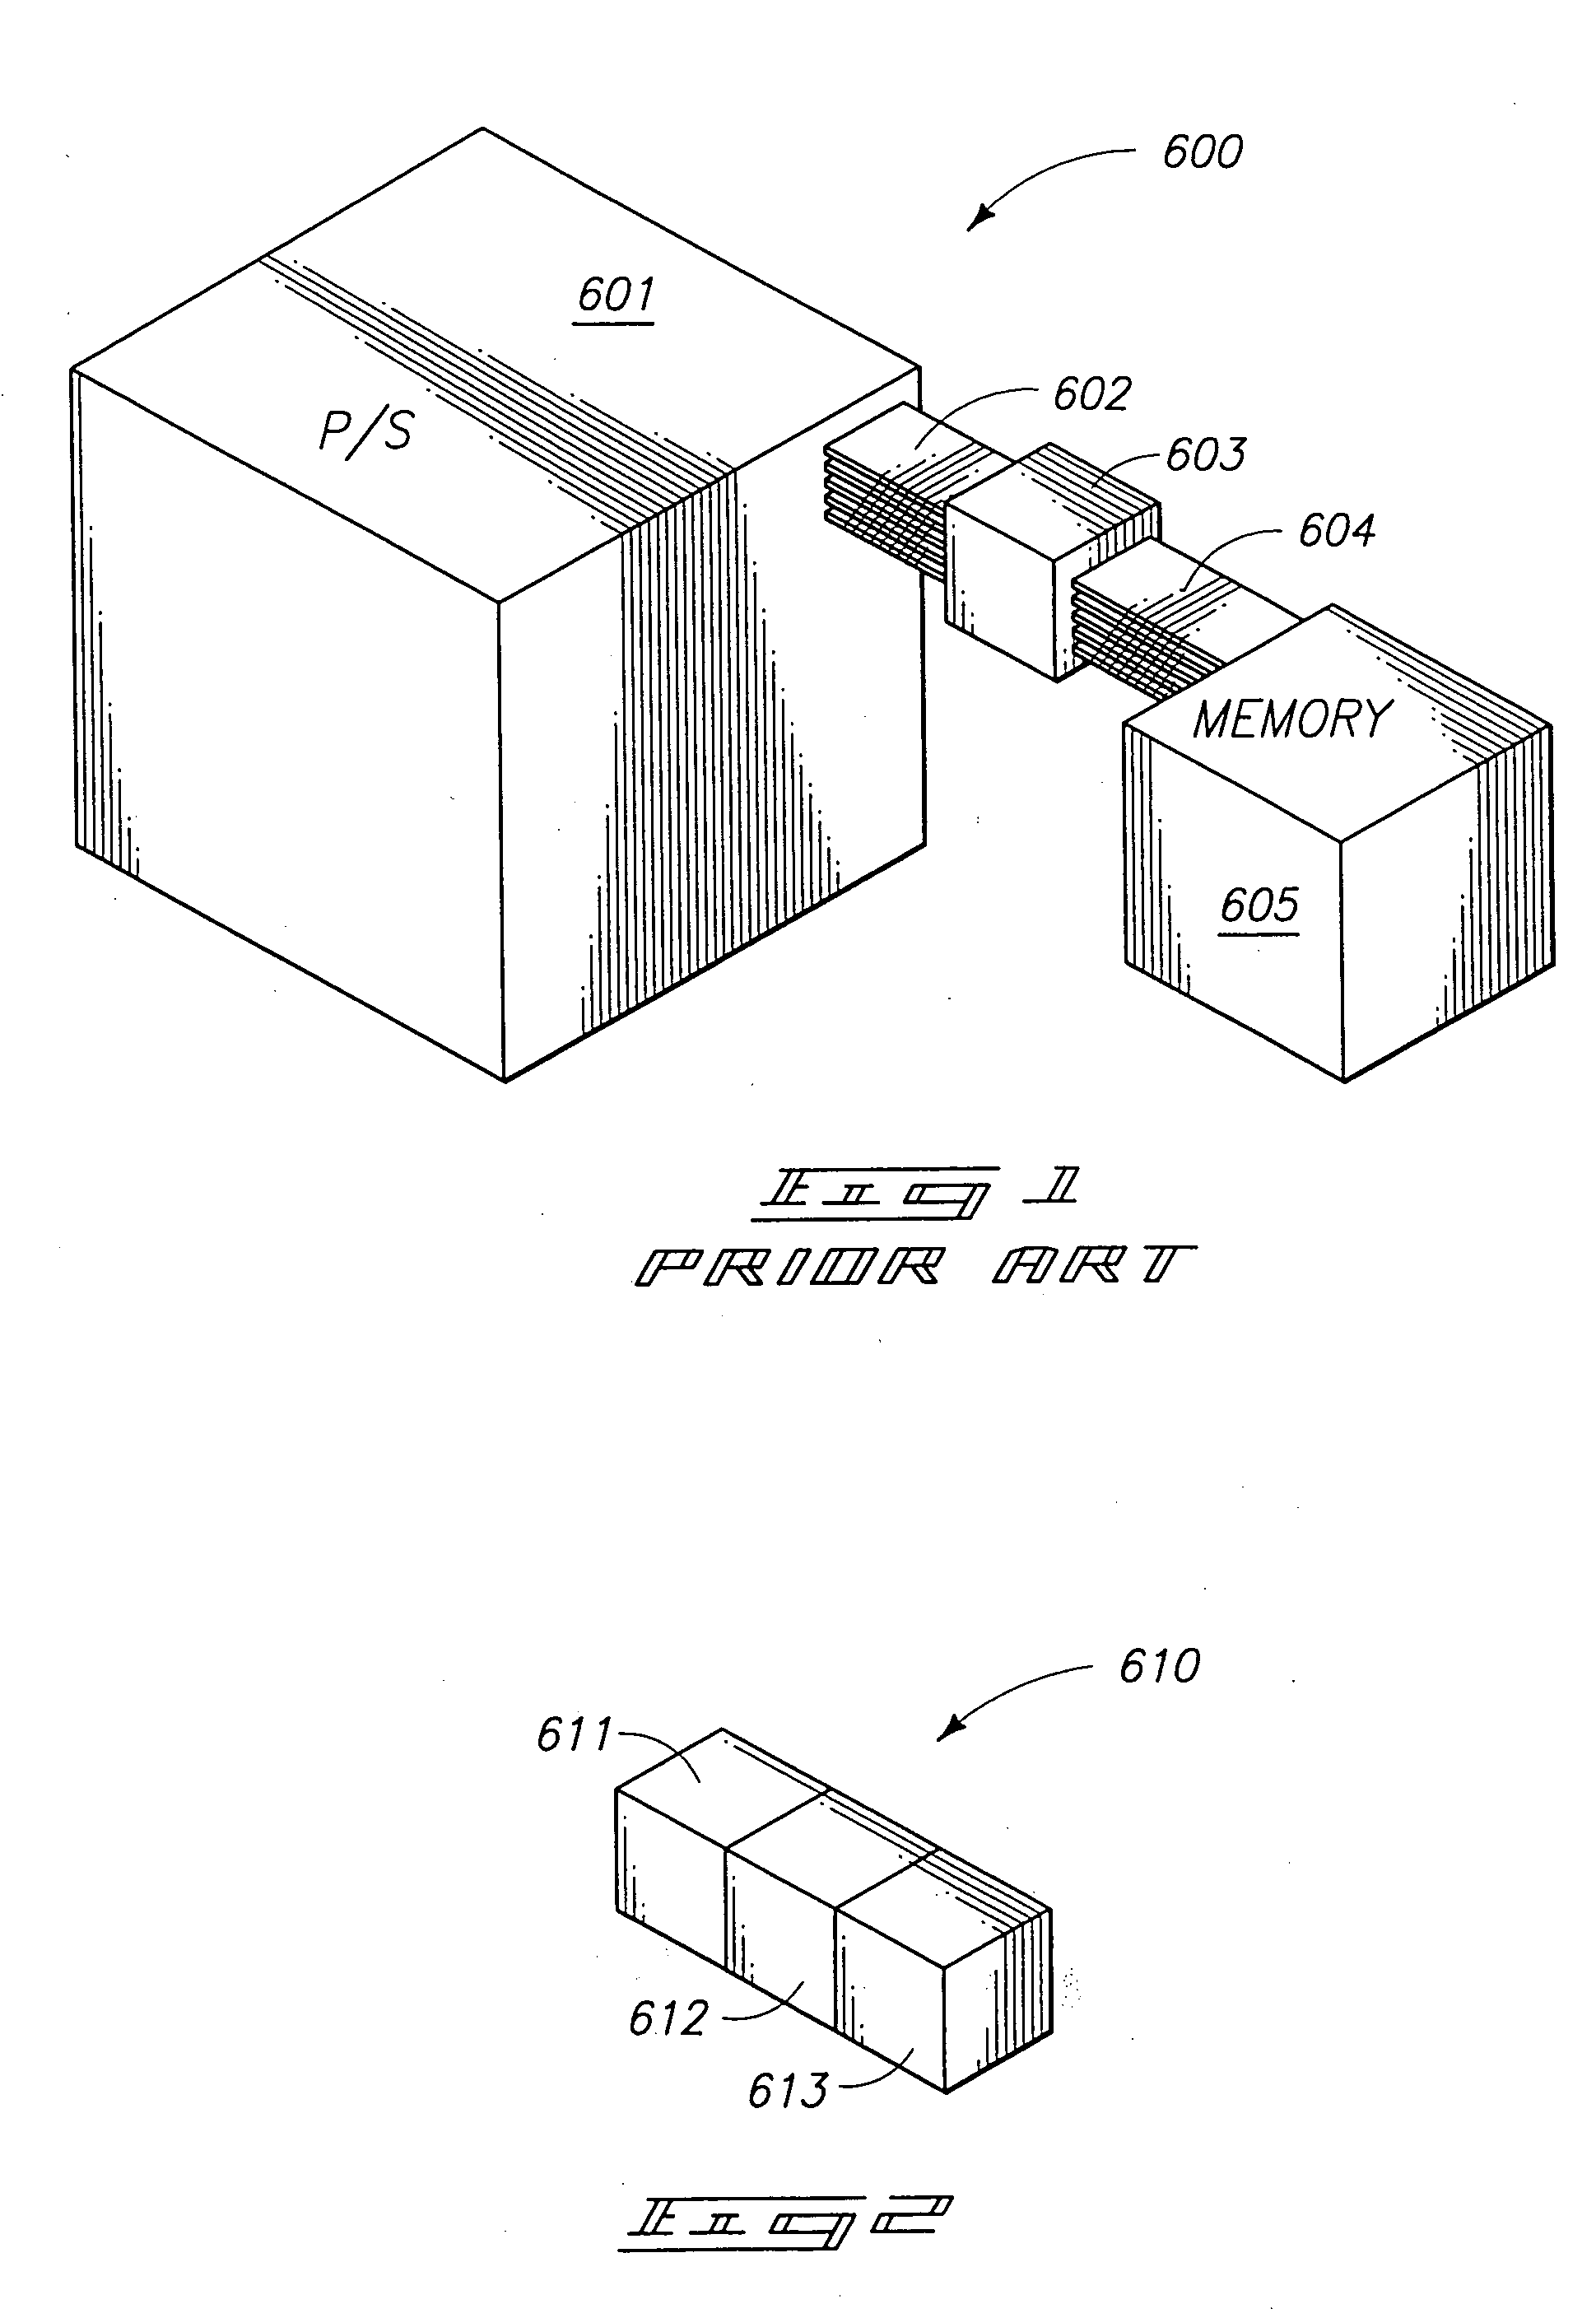 Spray cooling system for transverse thin-film evaporative spray cooling